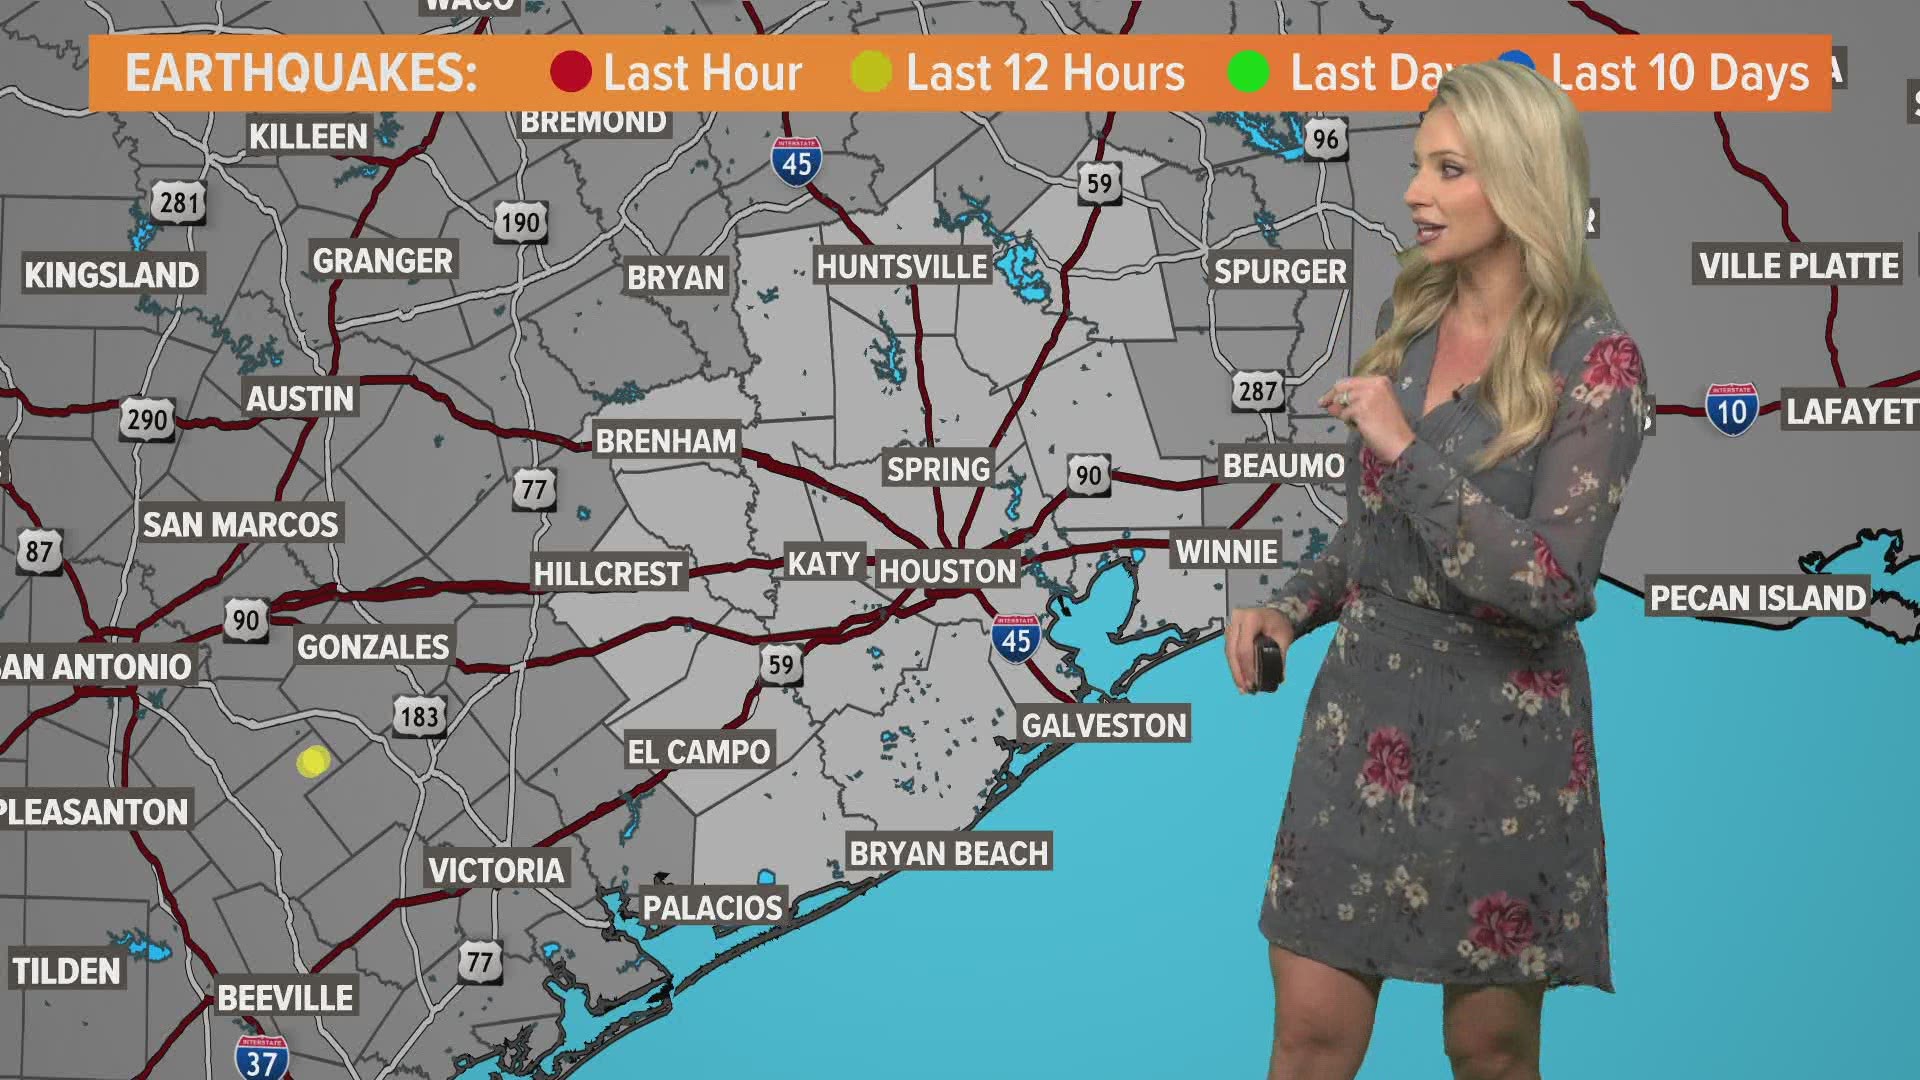 KHOU 11 Meteorologist Chita Craft says a small earthquake was reported just south of Smiley, Texas